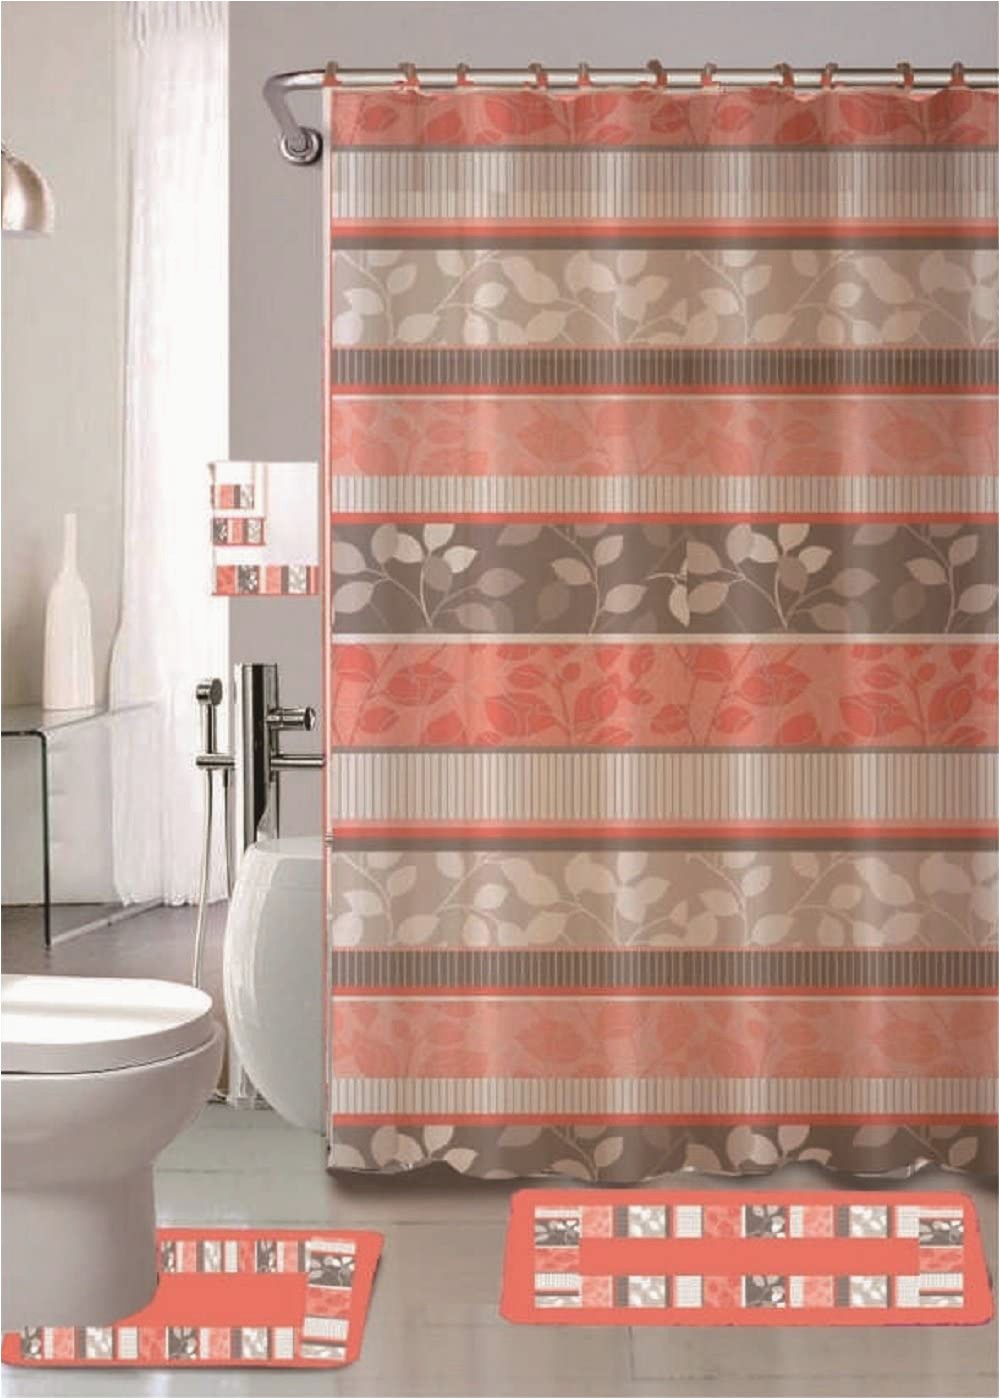 Peach Bath towels and Rugs 18 Piece Bathroom Set with Rugs Mats Shower Curtains Rings